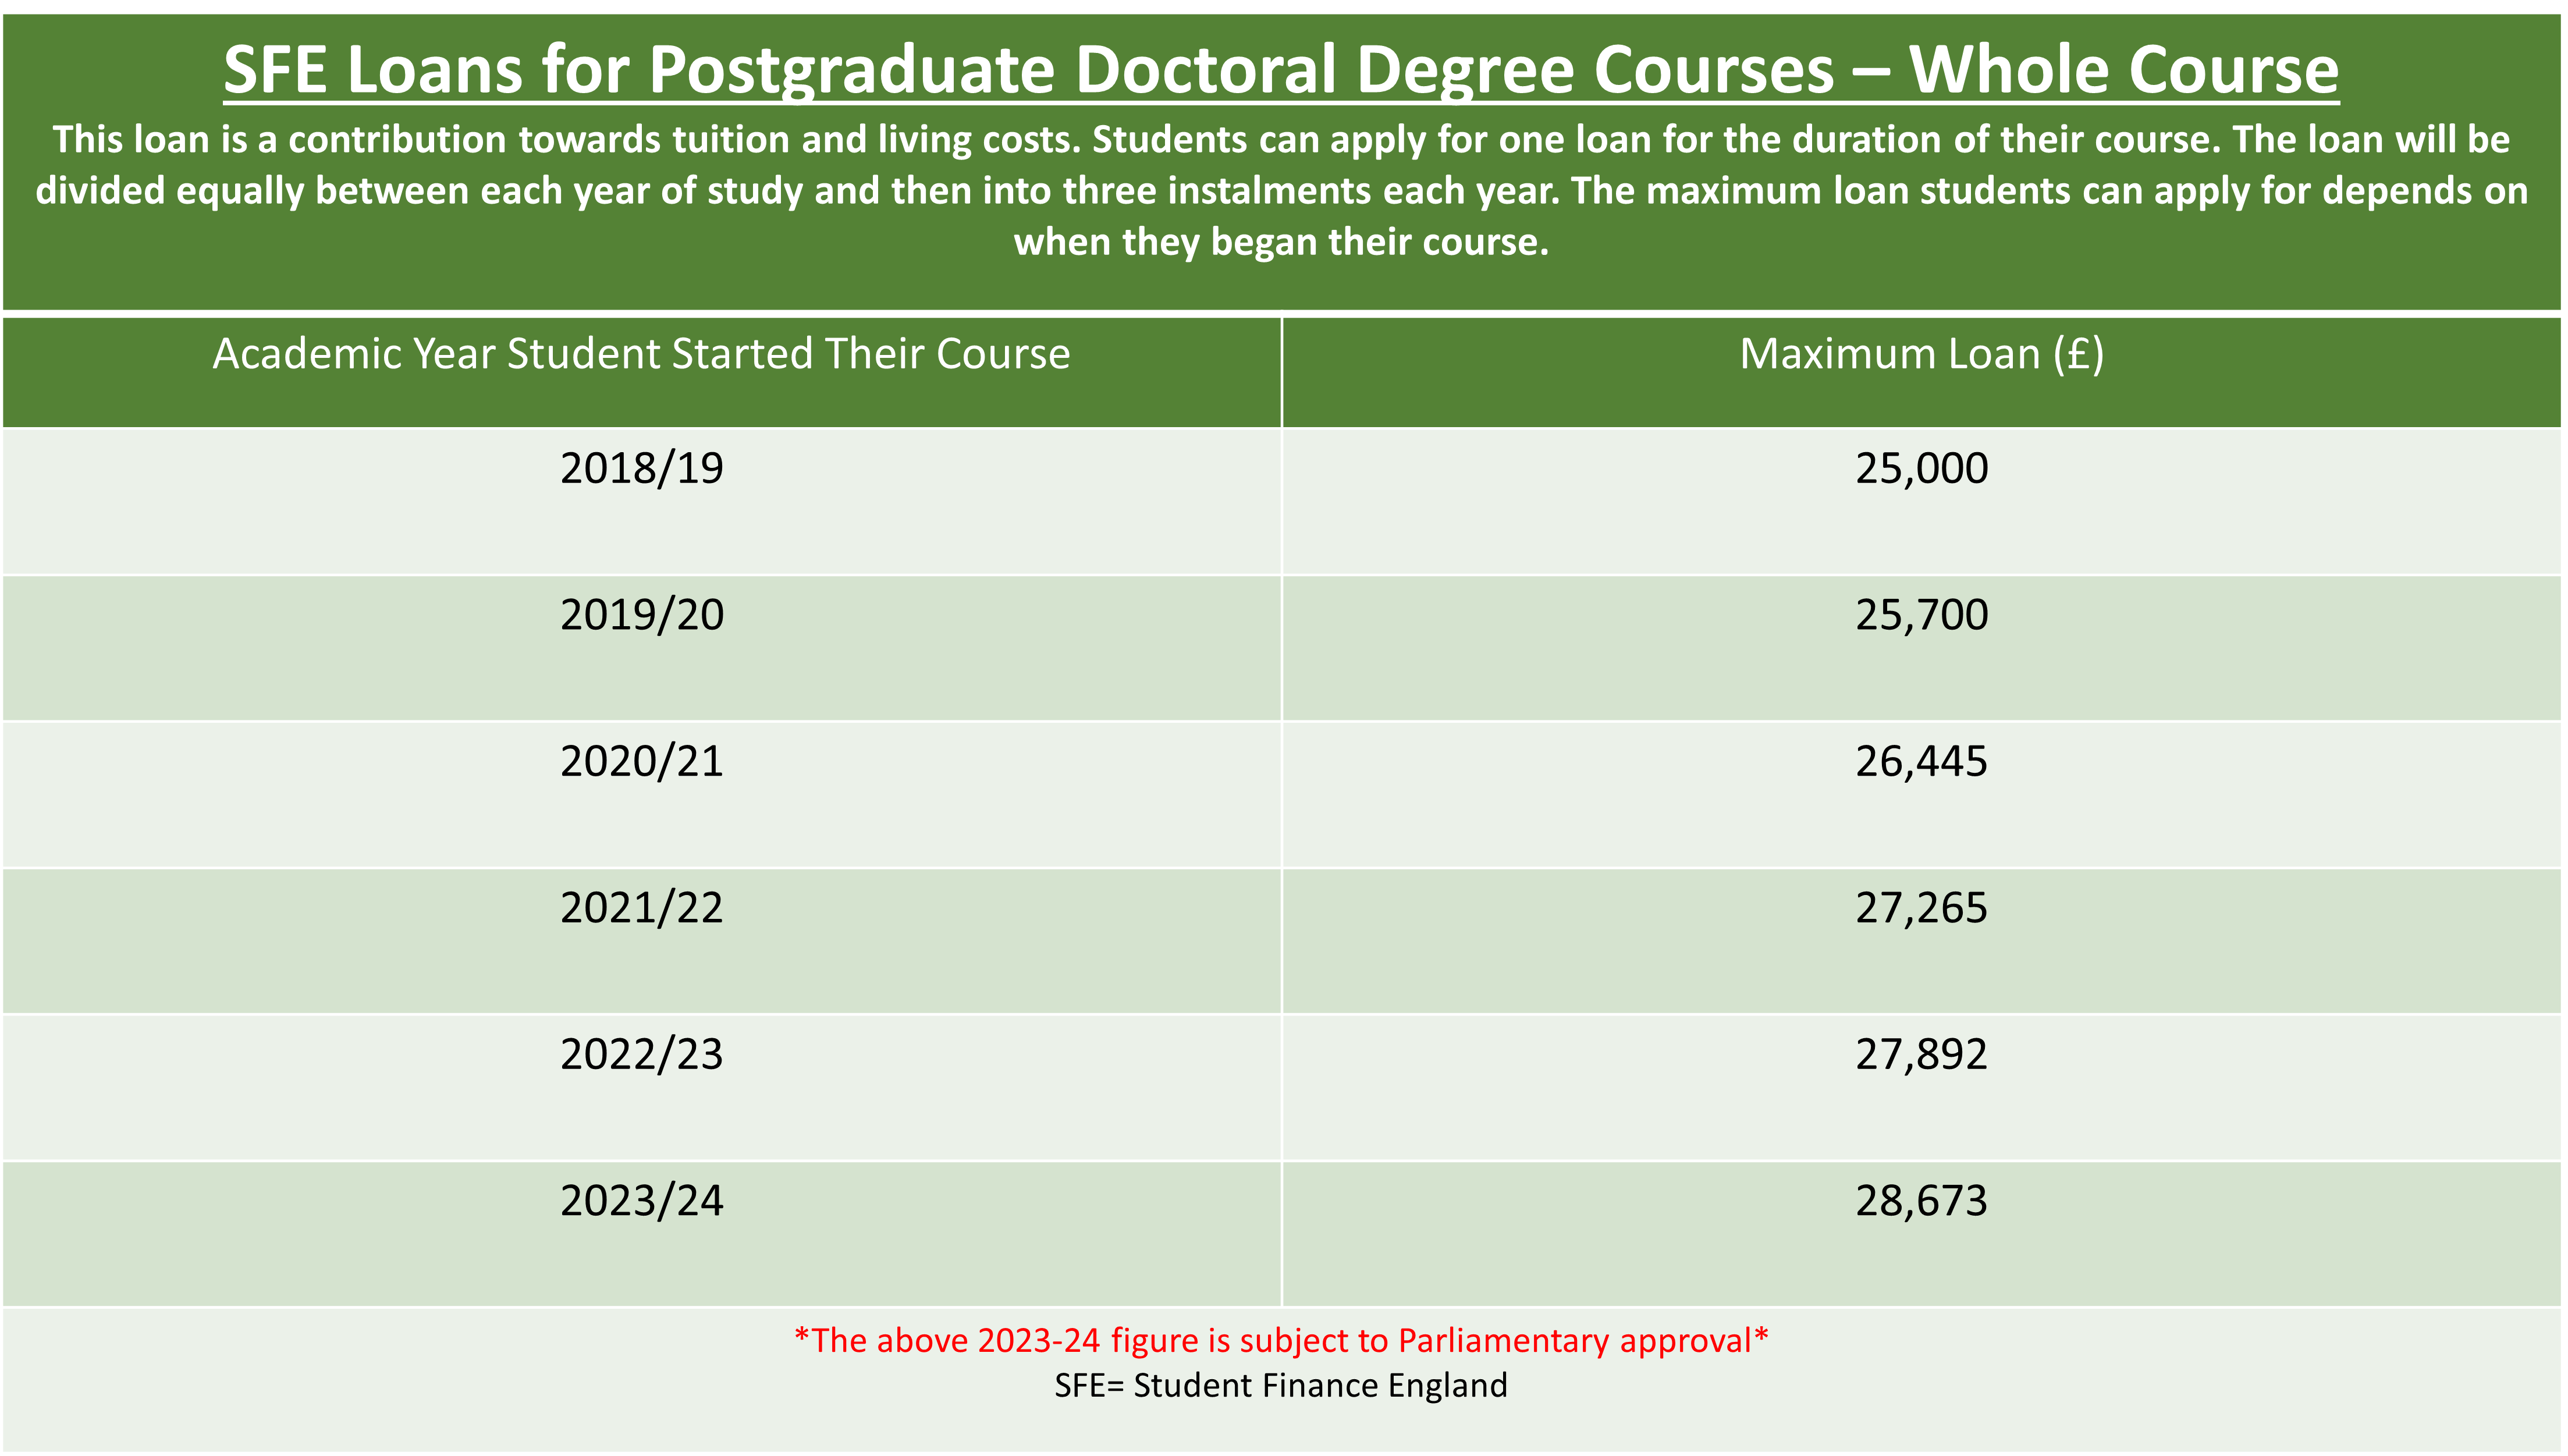 Table demonstrating the maximum amount of doctoral loan available depending on year of entry. 2023-24 figure subject to parliamentary approval.